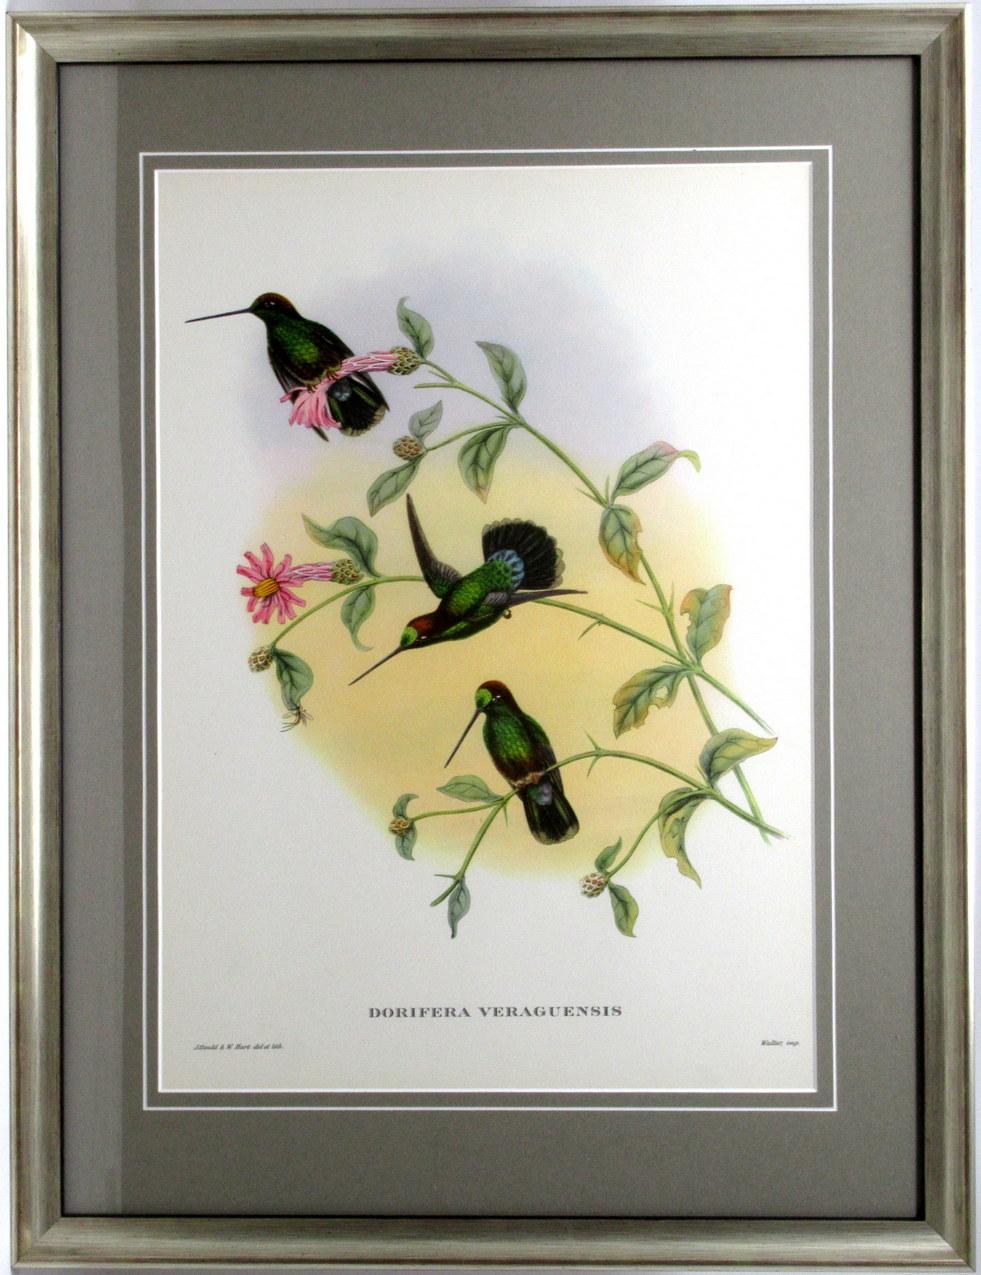 Set of eight framed and mounted color lithographs from the original first edition of Goulds Tropical birds from 1955 produced by the Ariel Press in London. 

Condition: Good condition with no foxing, frames and mounts are contemporary. 

Measures: